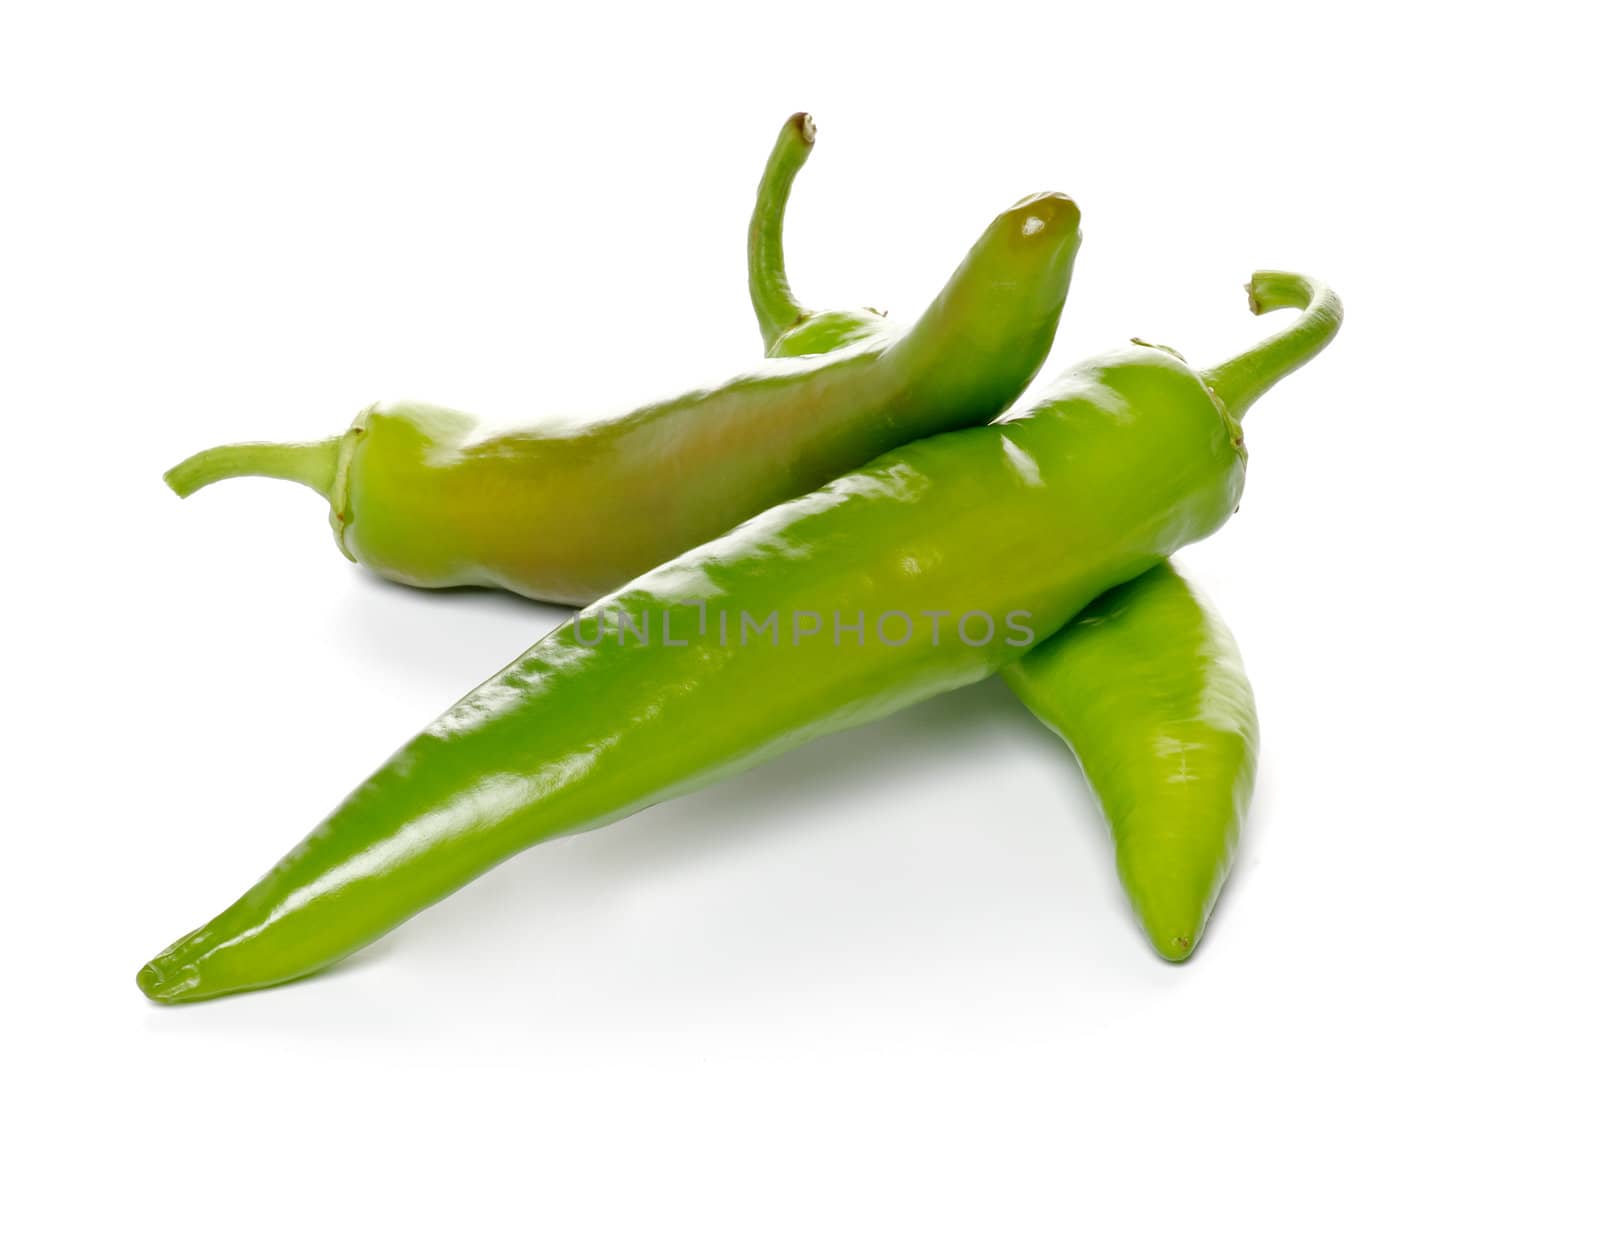 Three green Chili peppers isolated on white background